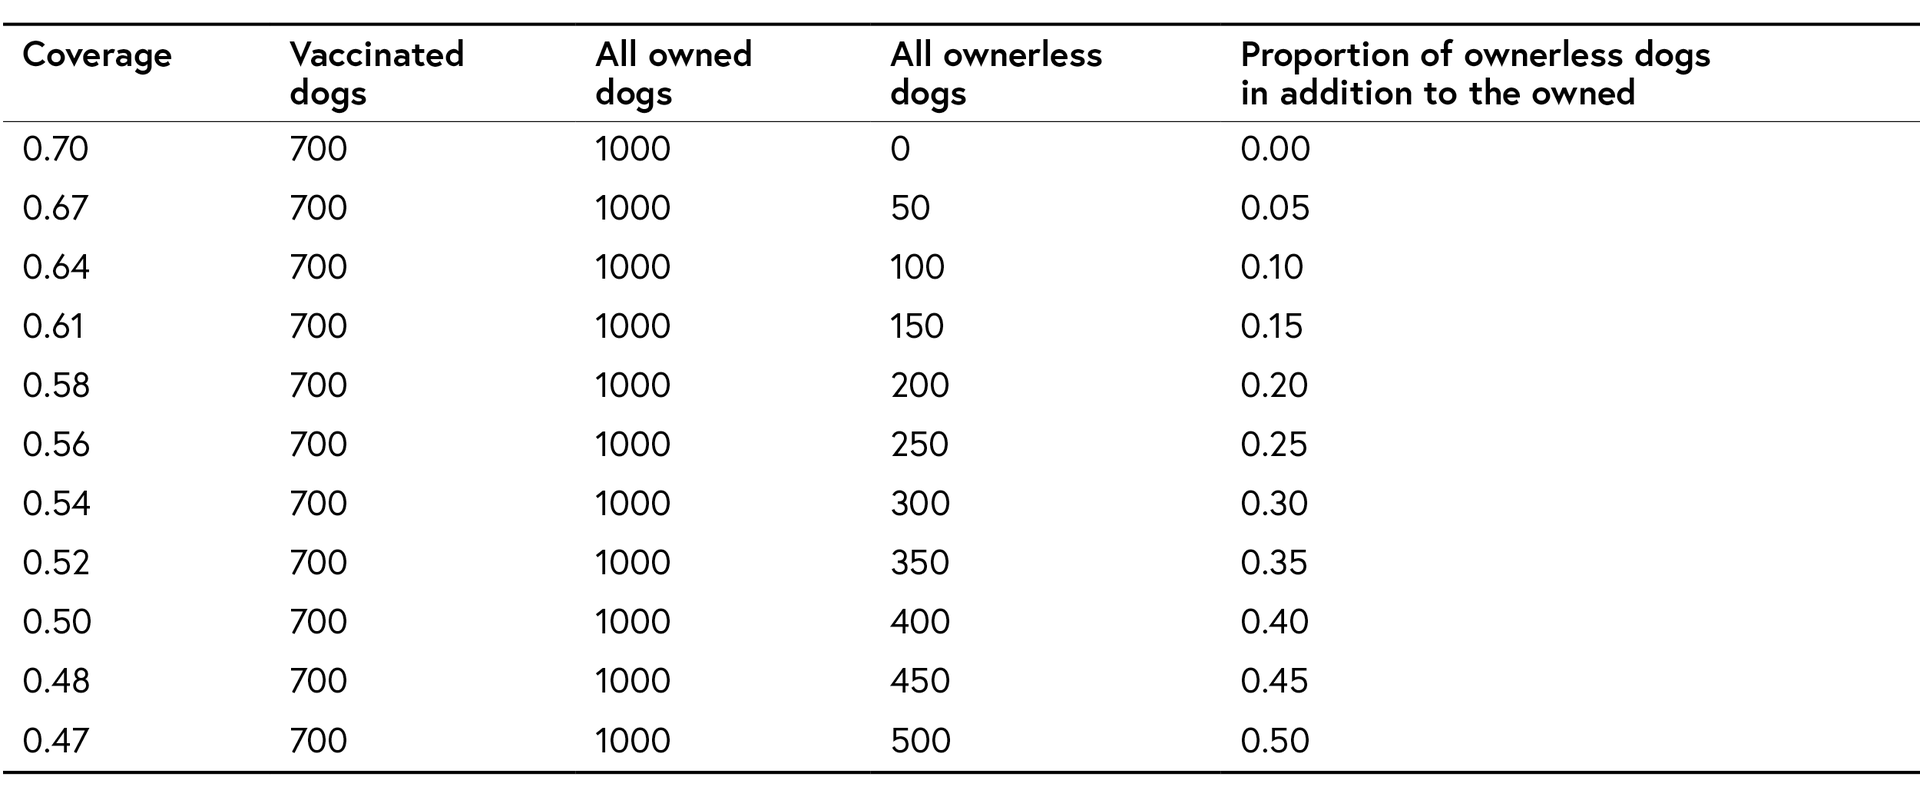 Table showing the relationship of the overall vaccination coverage of dogs in relation to the proportion of ownerless dogs.